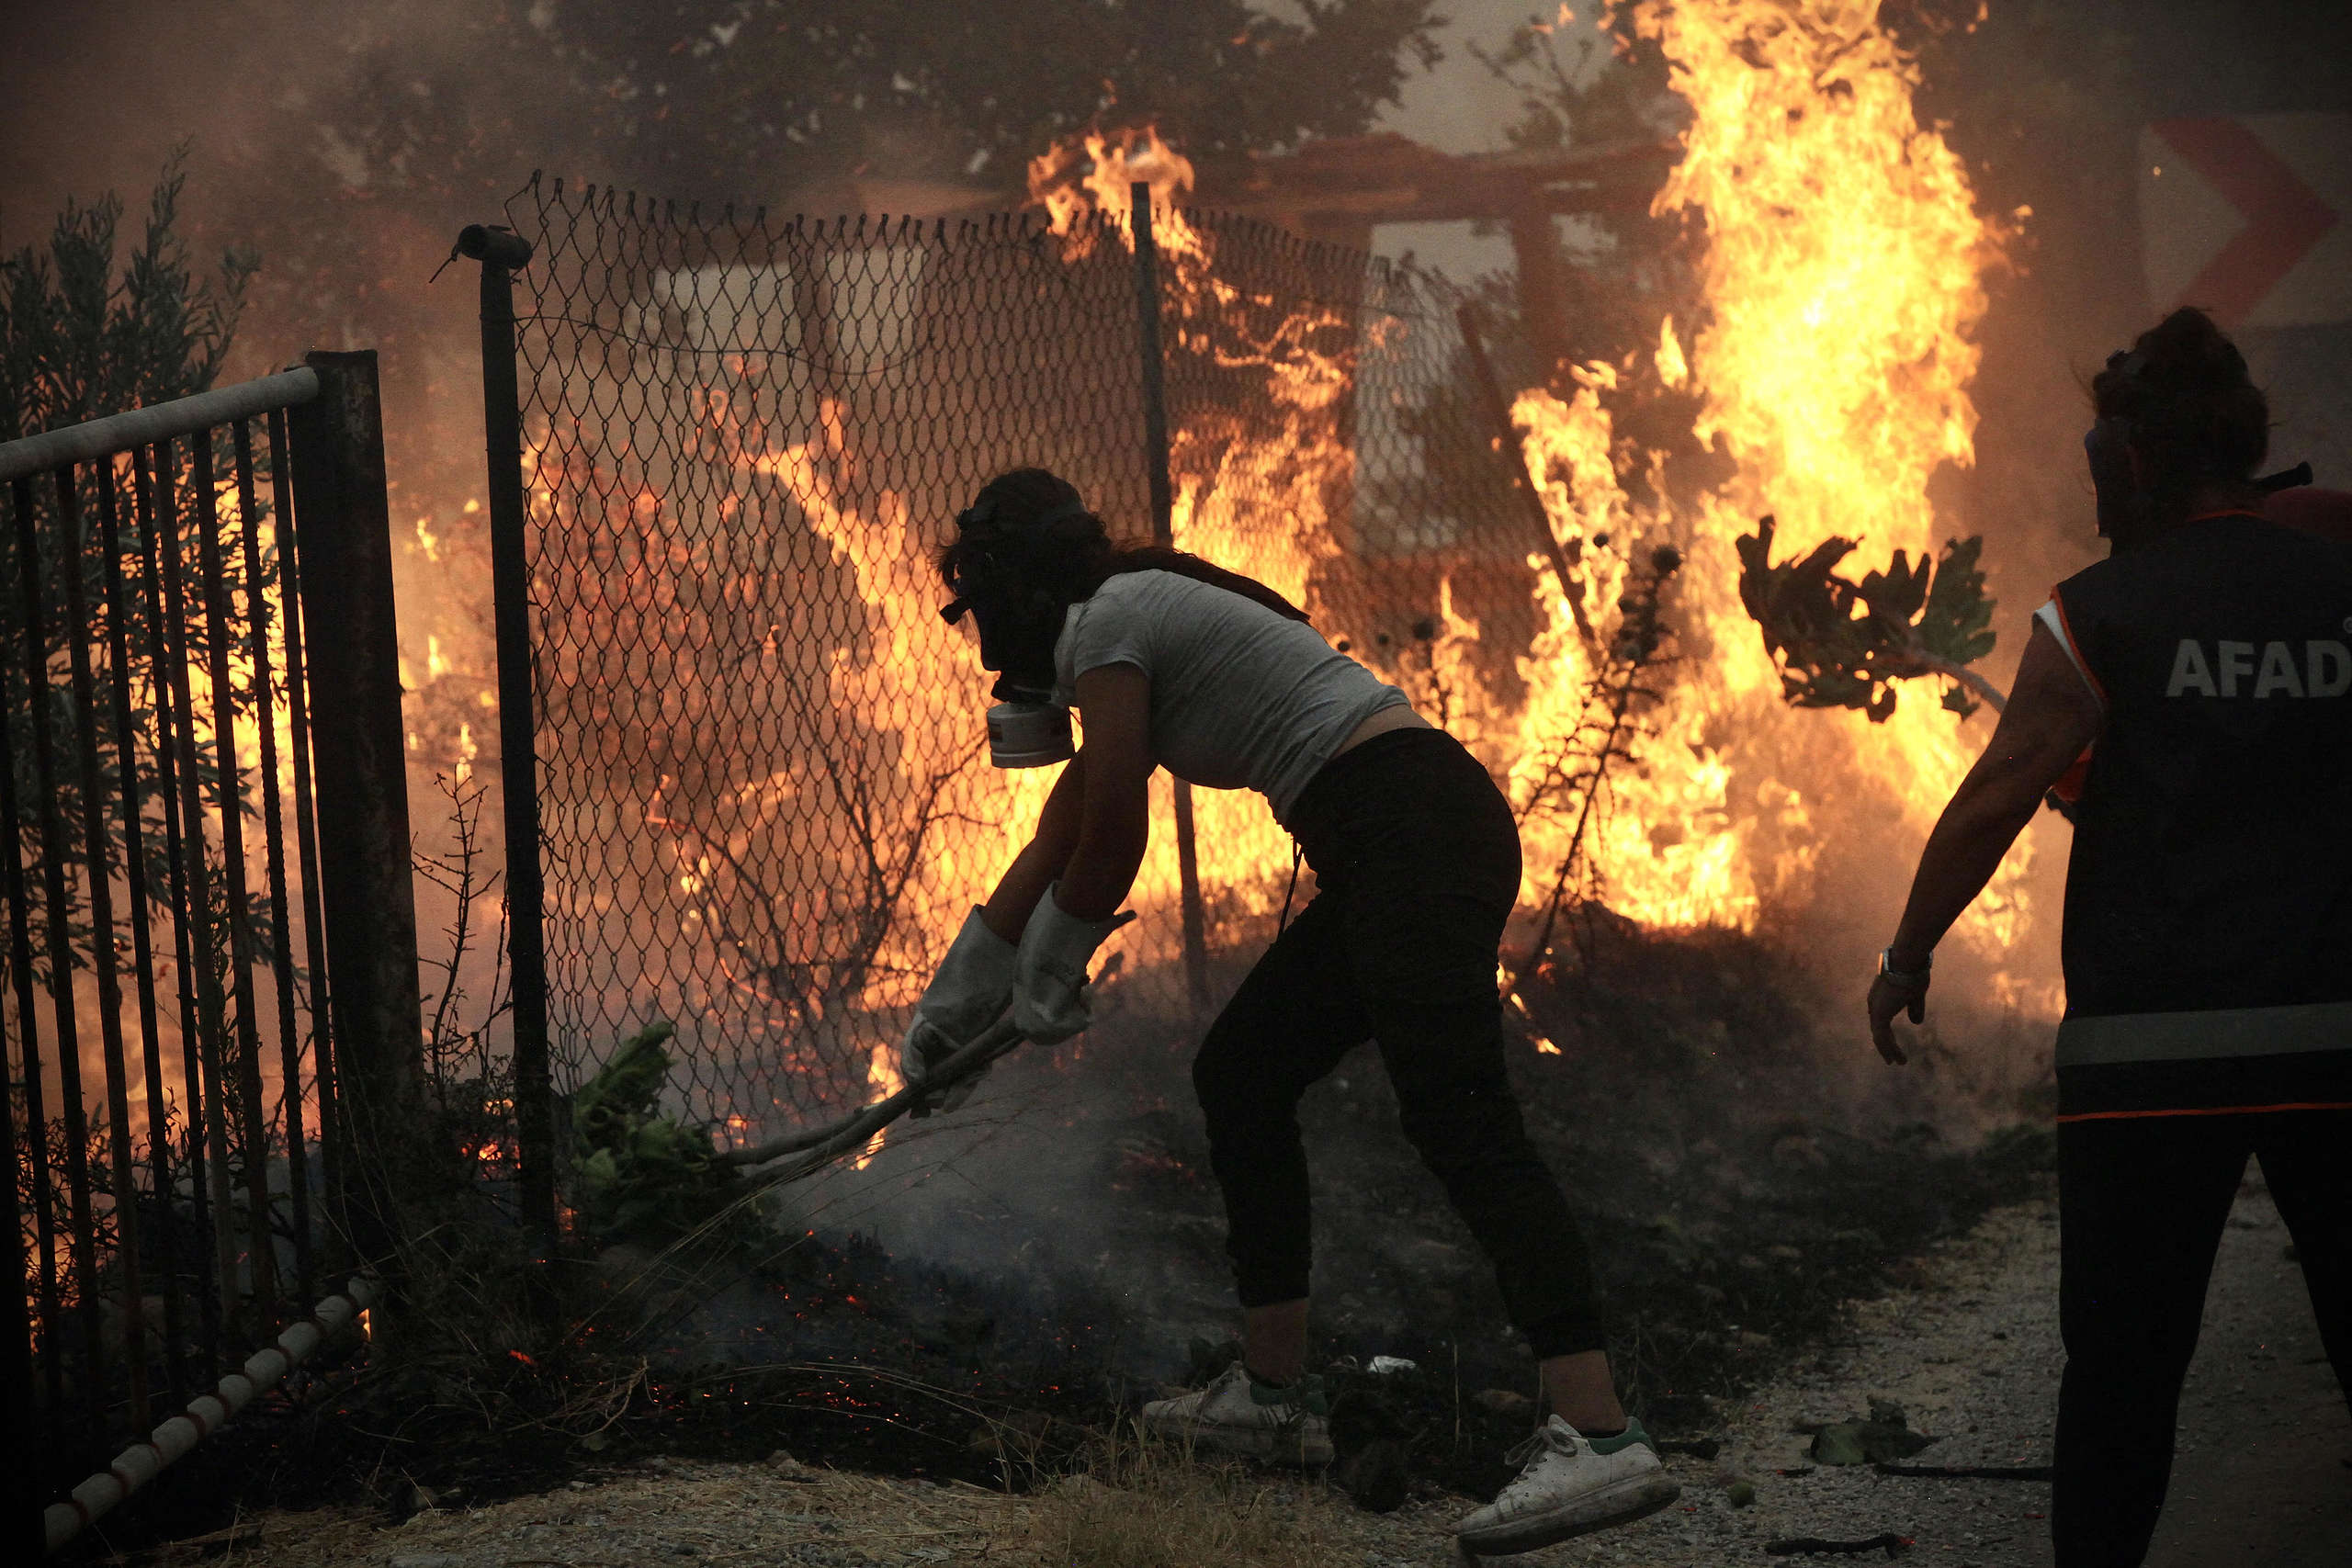 Inhabitants use branches to put out a fire spreading in the Aegean coast city of Oren, Turkey.